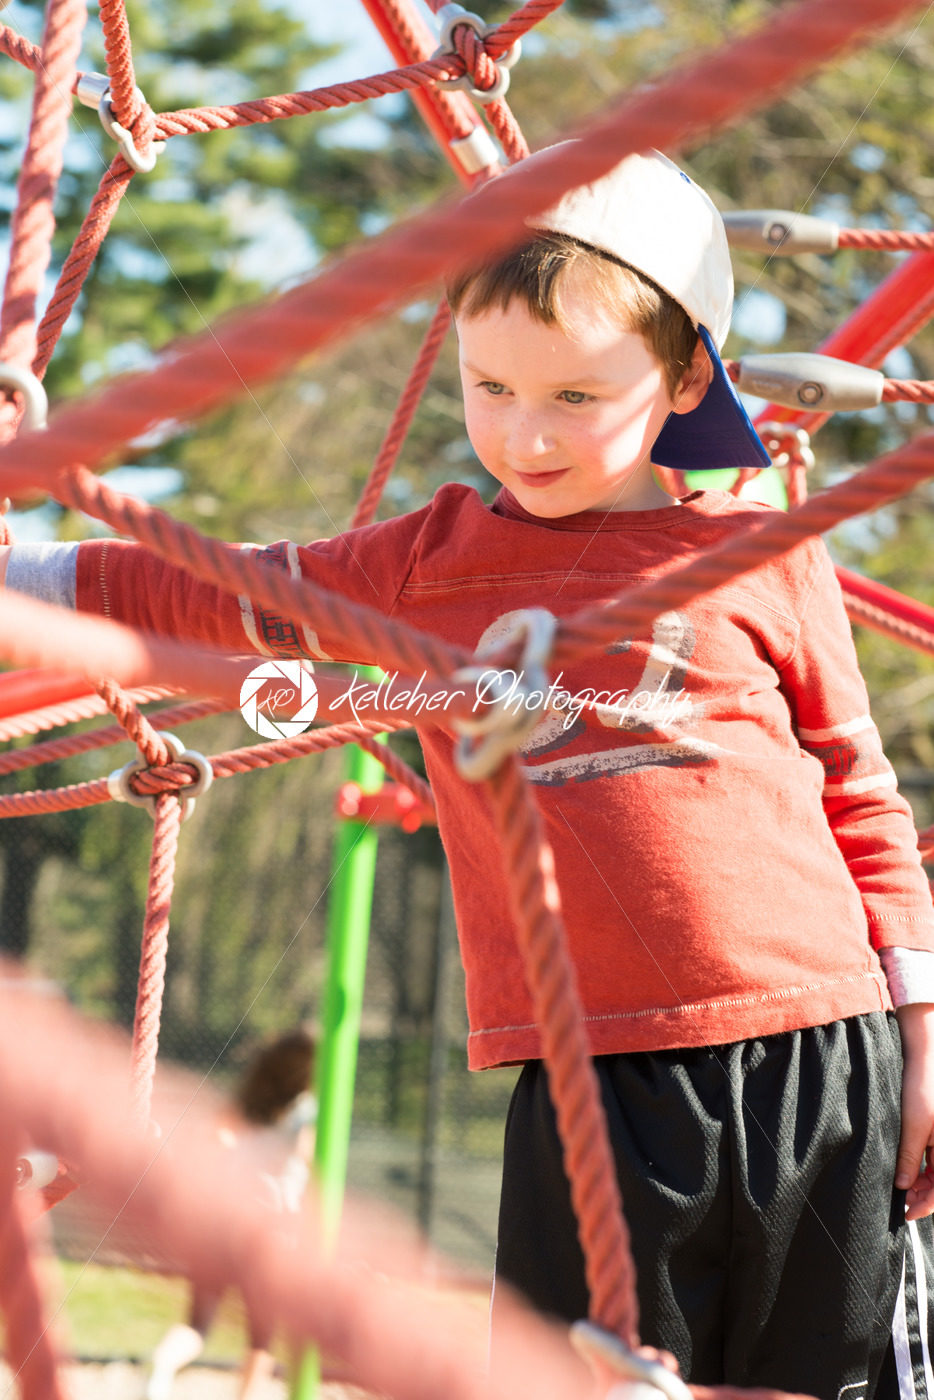 Young boy child playing at outdoor playground climbing net - Kelleher Photography Store